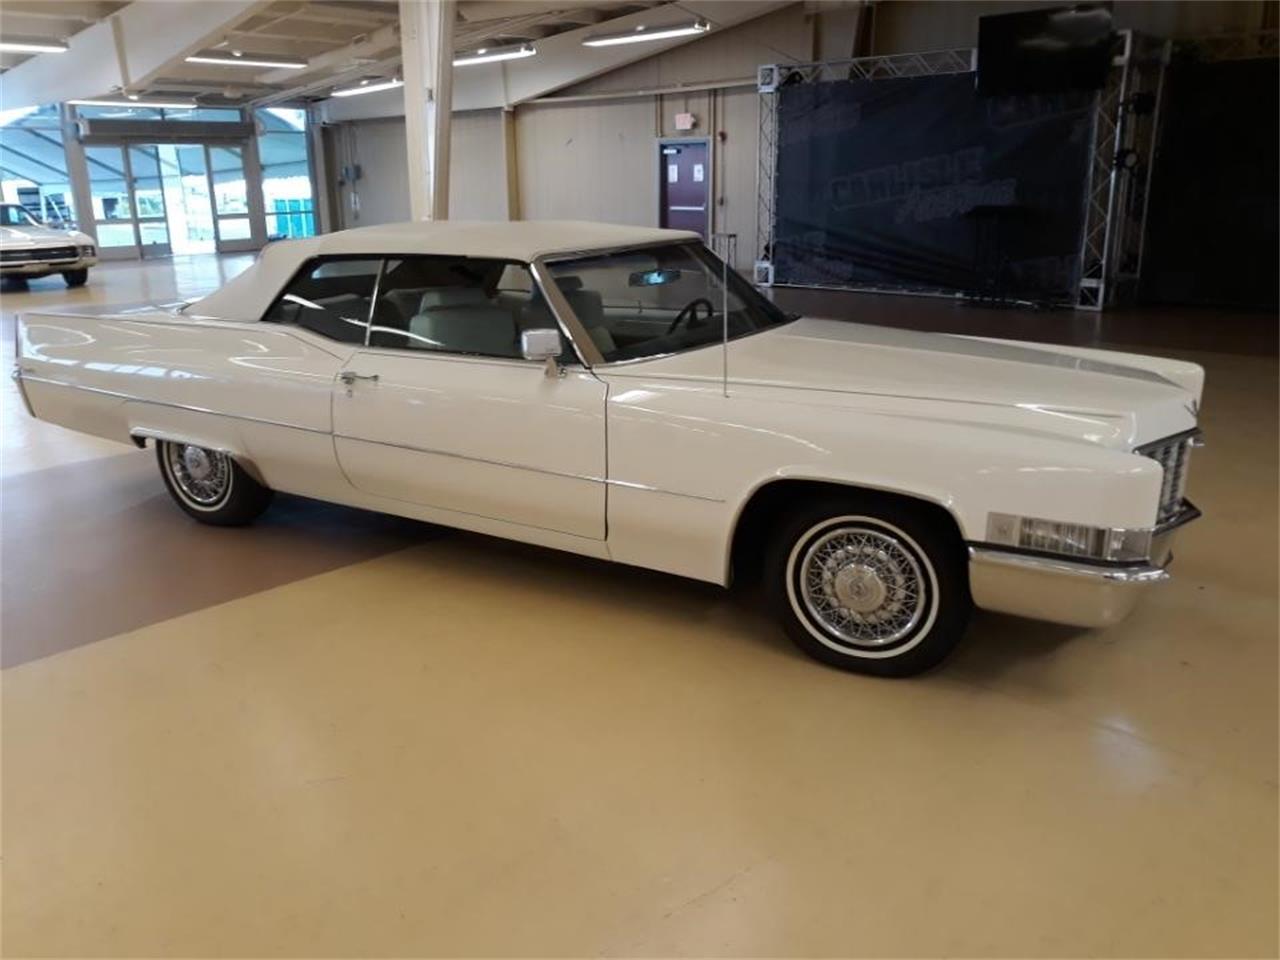 1969 Cadillac Coupe DeVille for sale in Carlisle, PA